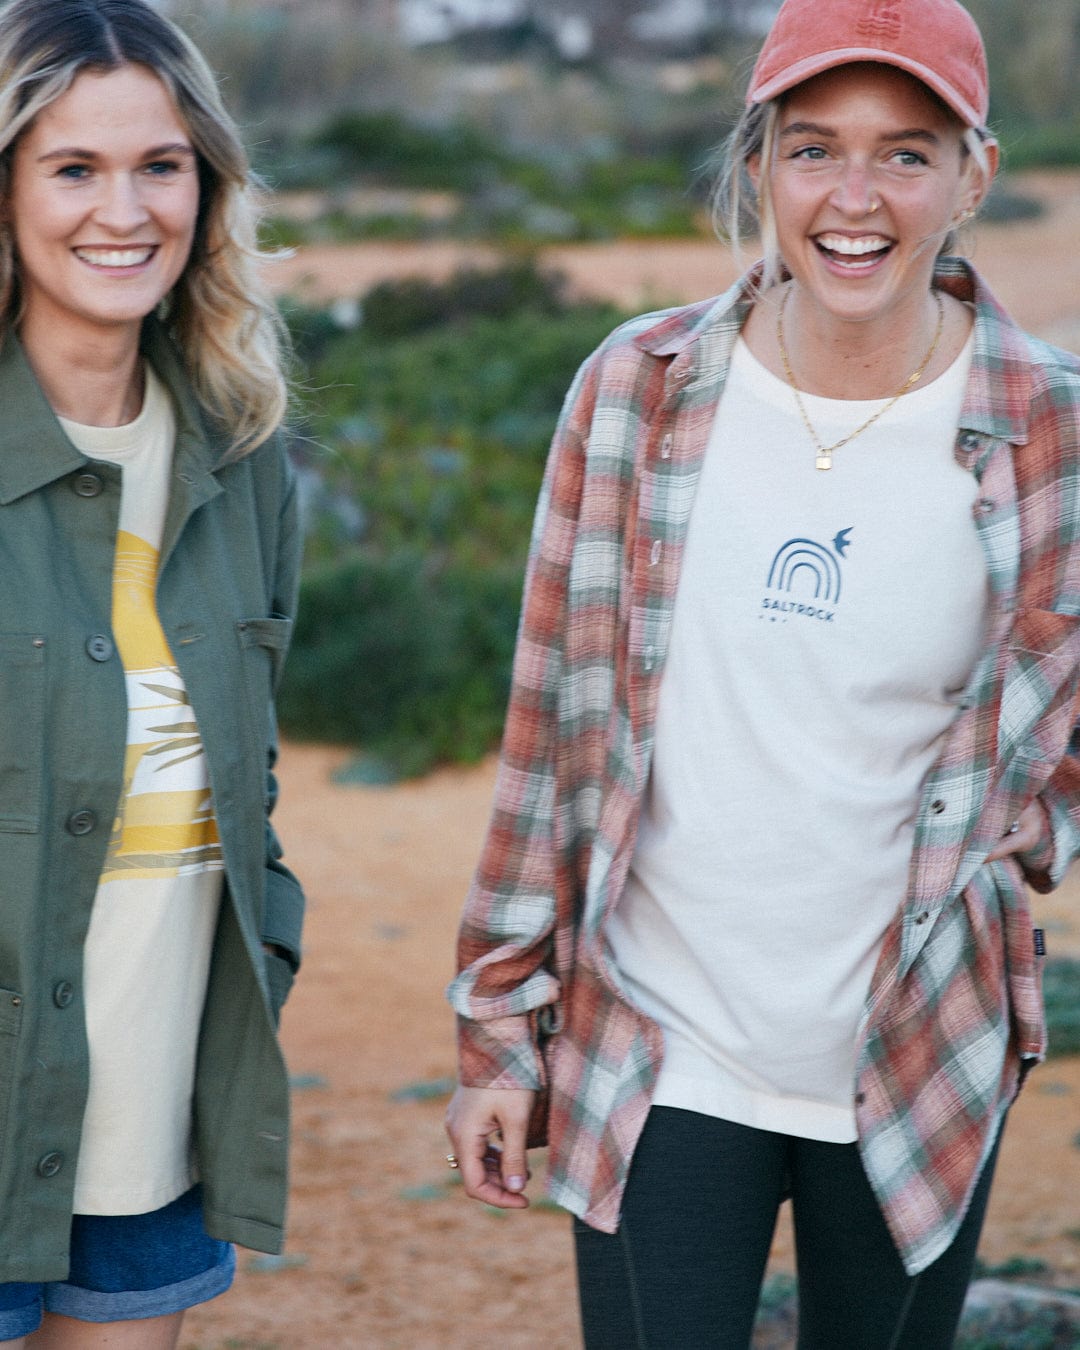 Two smiling women standing outdoors, one wearing a Saltrock Rosalin Womens Long Sleeve Shirt in orange/green with contrasting buttons over a graphic tee and the other in a green jacket and striped Longline shirt.